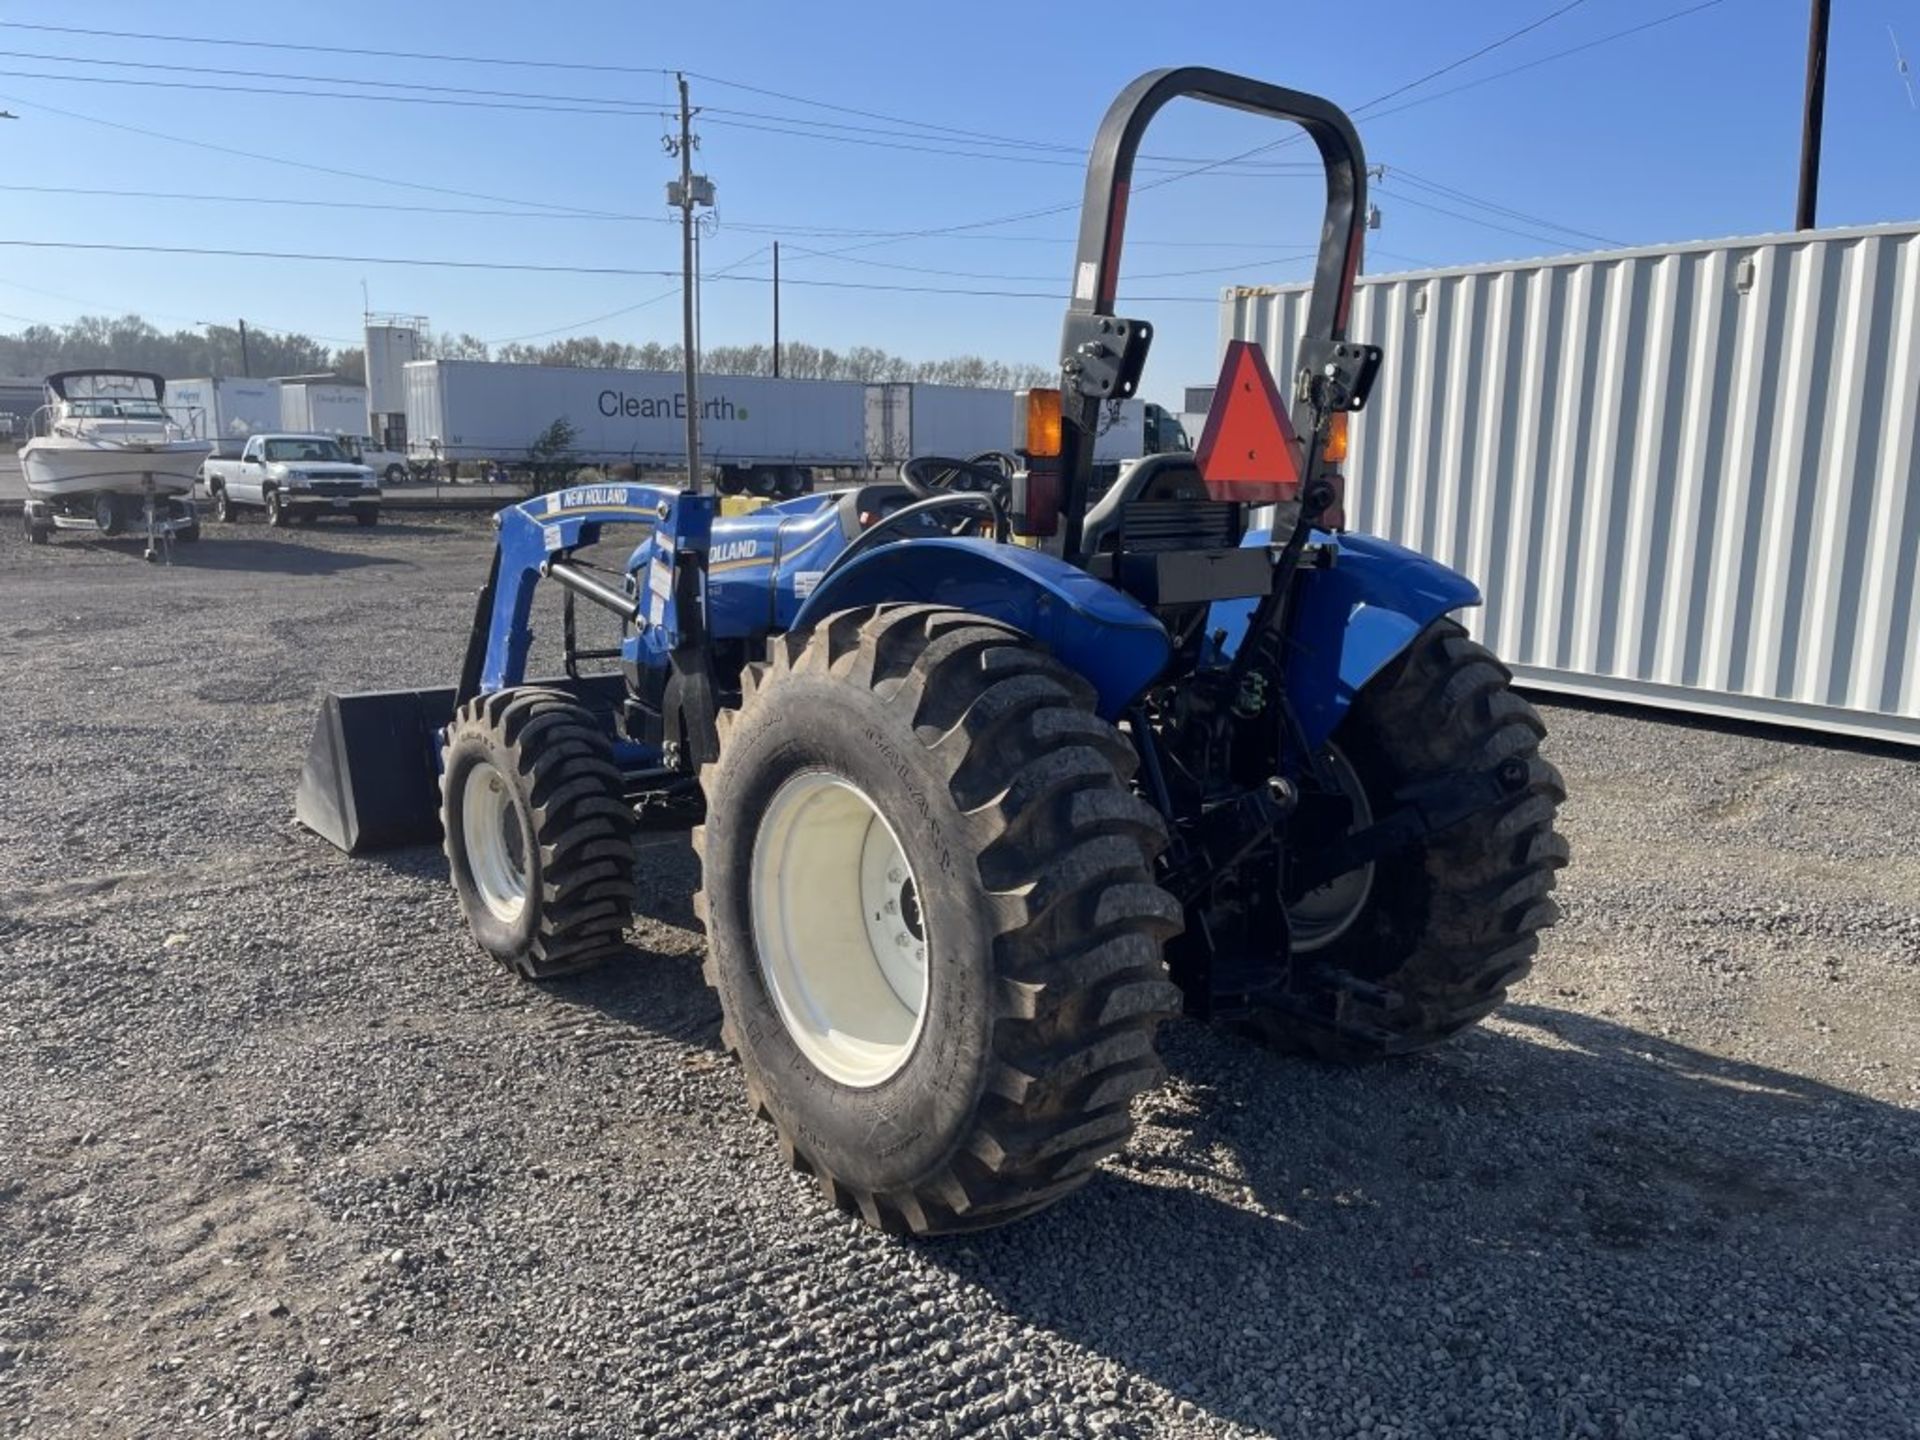 2017 Newholland Workmaster 60 Utility Tractor - Image 6 of 30